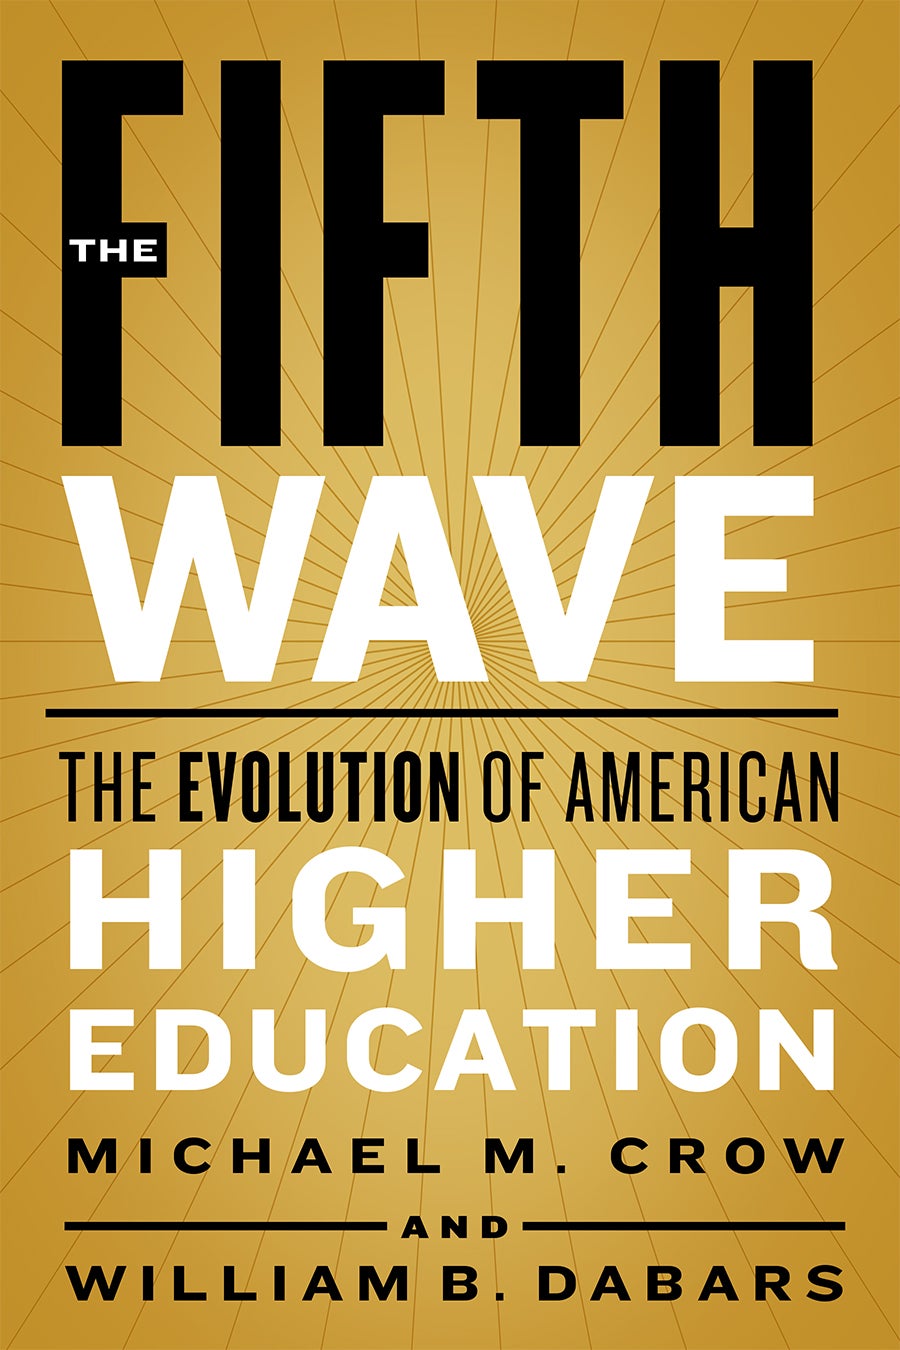 Michael M. Crow and William B. Dabars, The Fifth Wave: The Evolution of American Higher Education (Baltimore: JHUP, 2020)